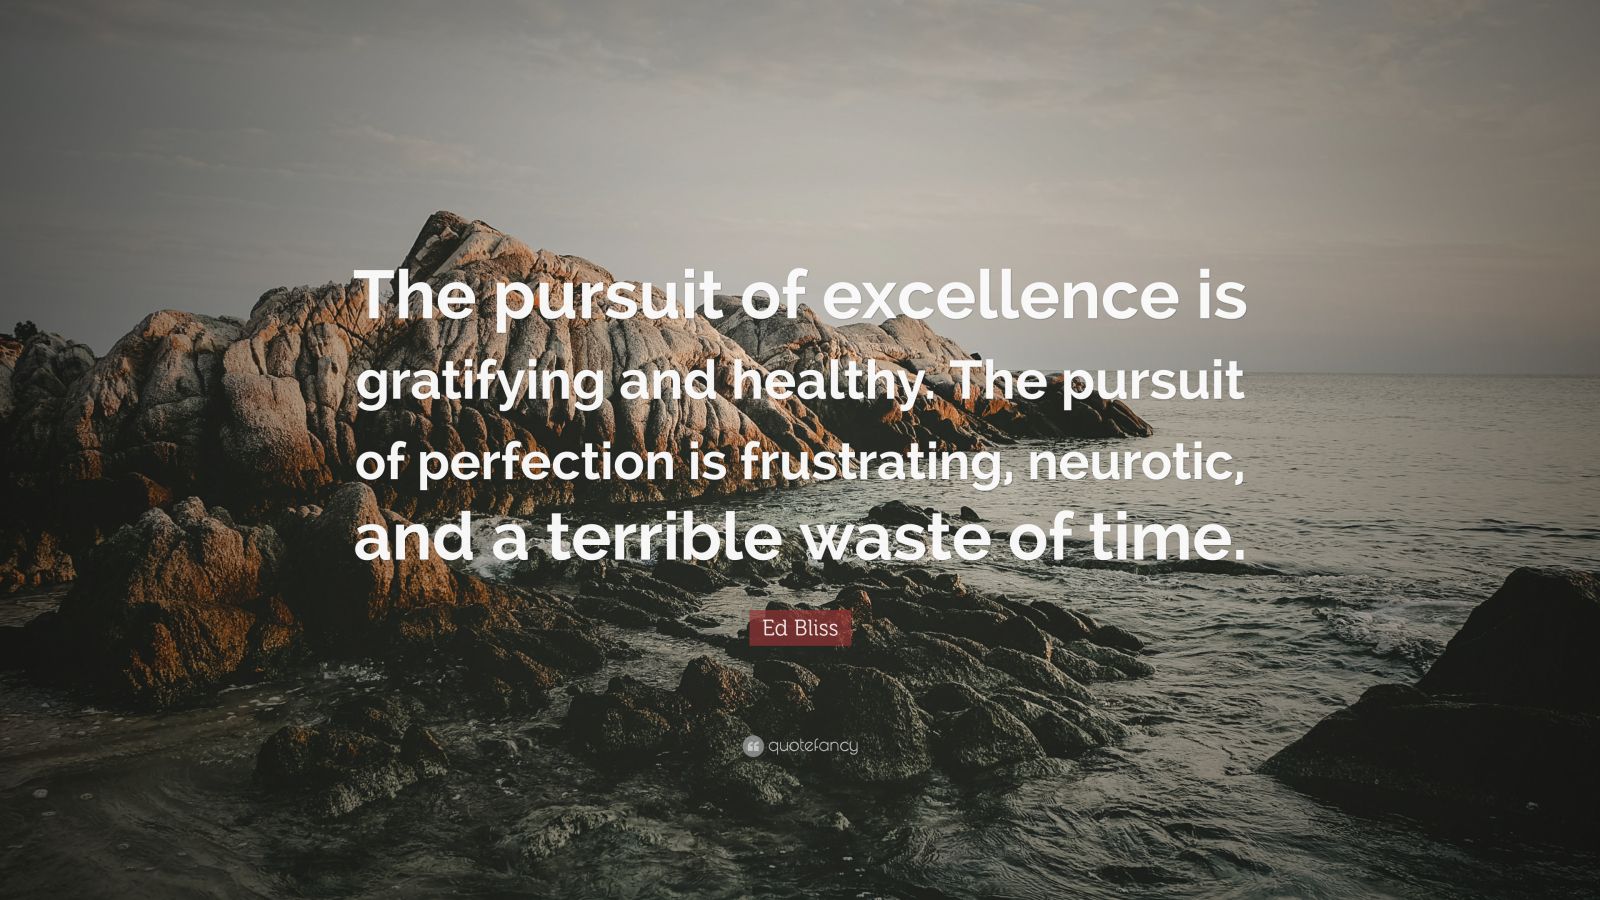 Ed Bliss Quote: "The pursuit of excellence is gratifying and healthy. The pursuit of perfection ...